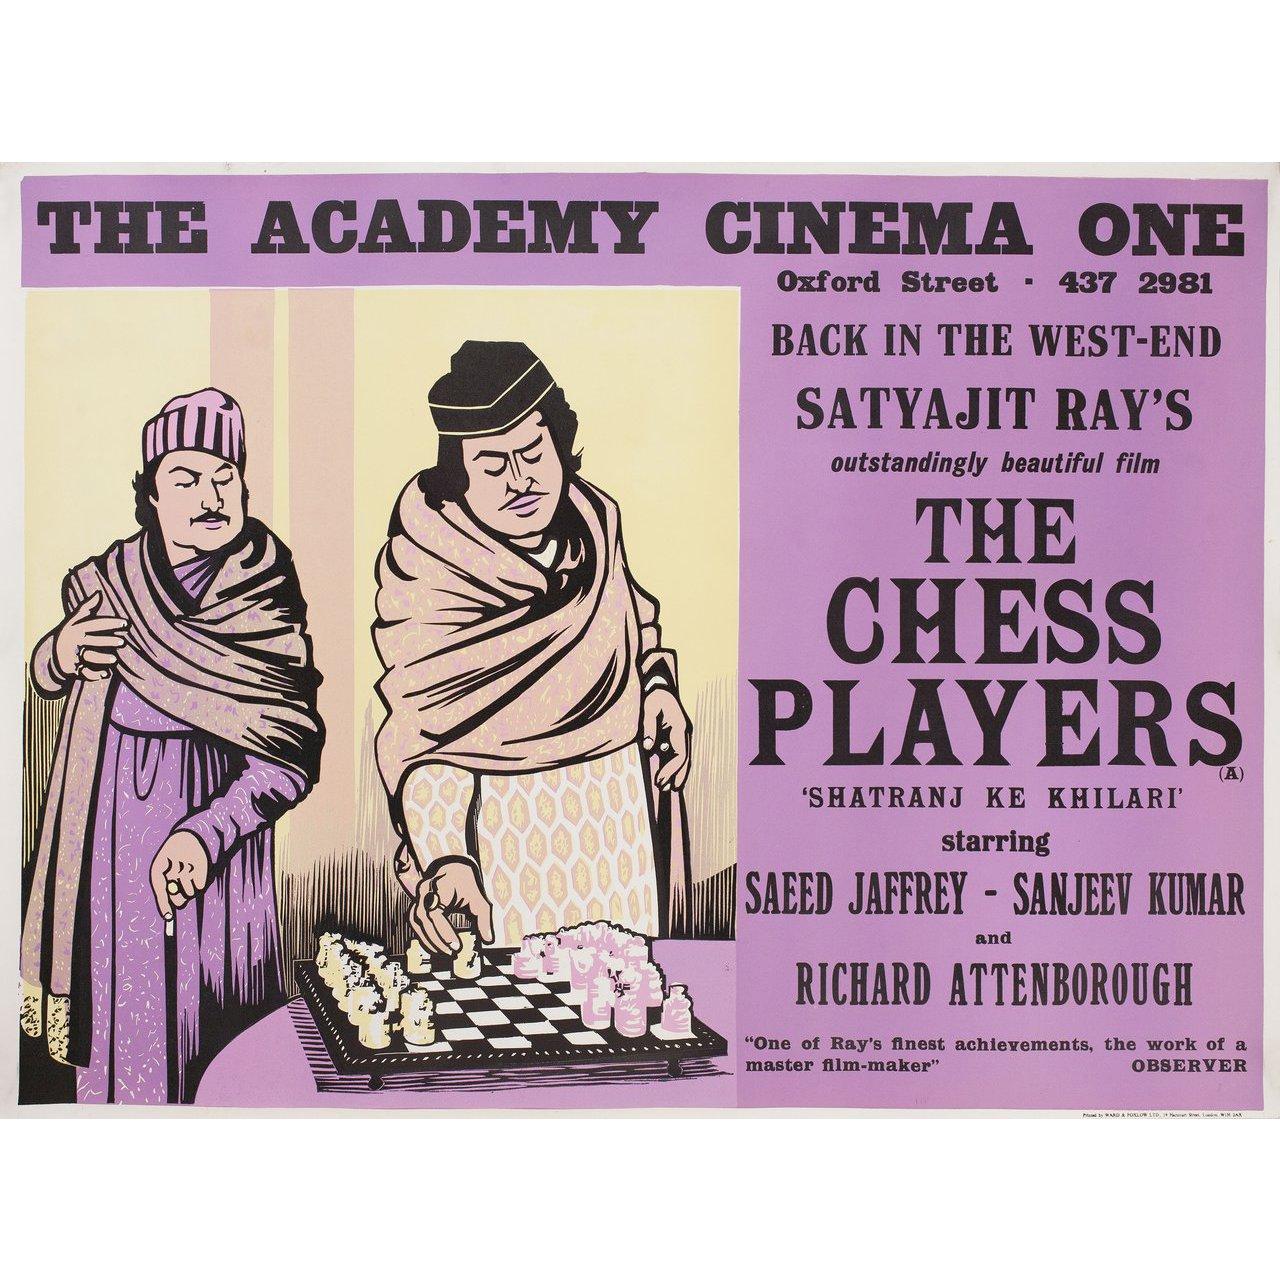 Original 1970s British quad poster by Peter Strausfeld for the film The Chess Players (Shatranj Ke Khilari) directed by Satyajit Ray with Sanjeev Kumar / Saeed Jaffrey / Shabana Azmi / Farida Jalal. Very Good-Fine condition, rolled. Please note: the